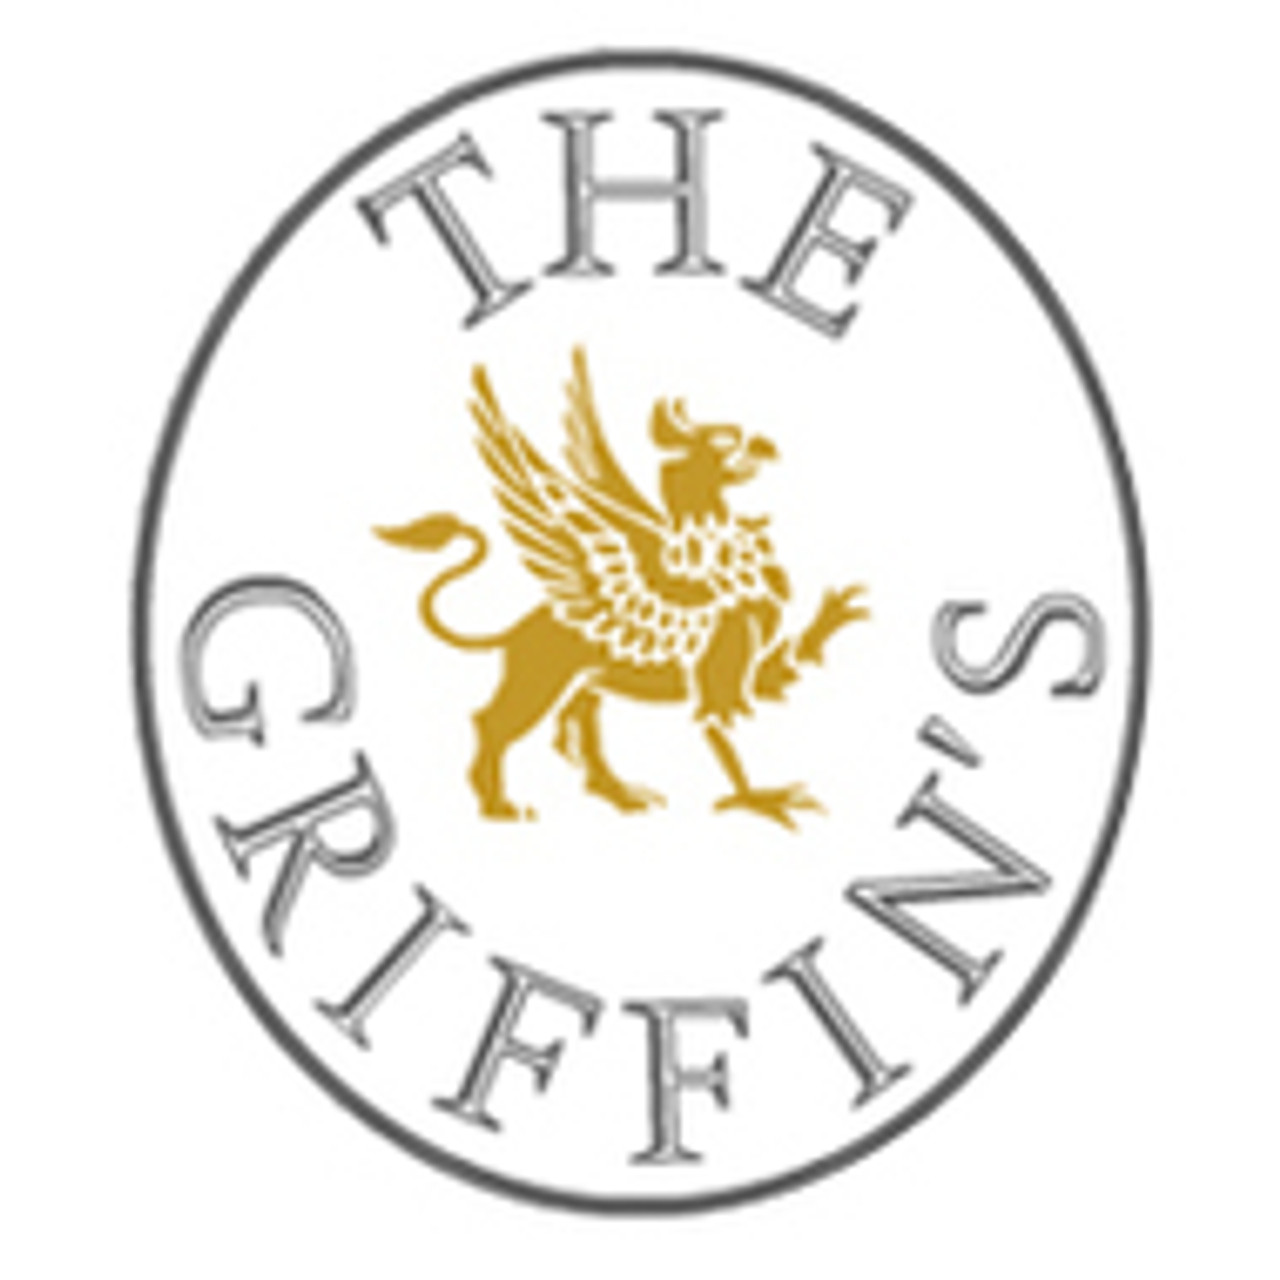 The Griffin's Robusto Tubo Cigars - 5 x 50 (Box of 20)